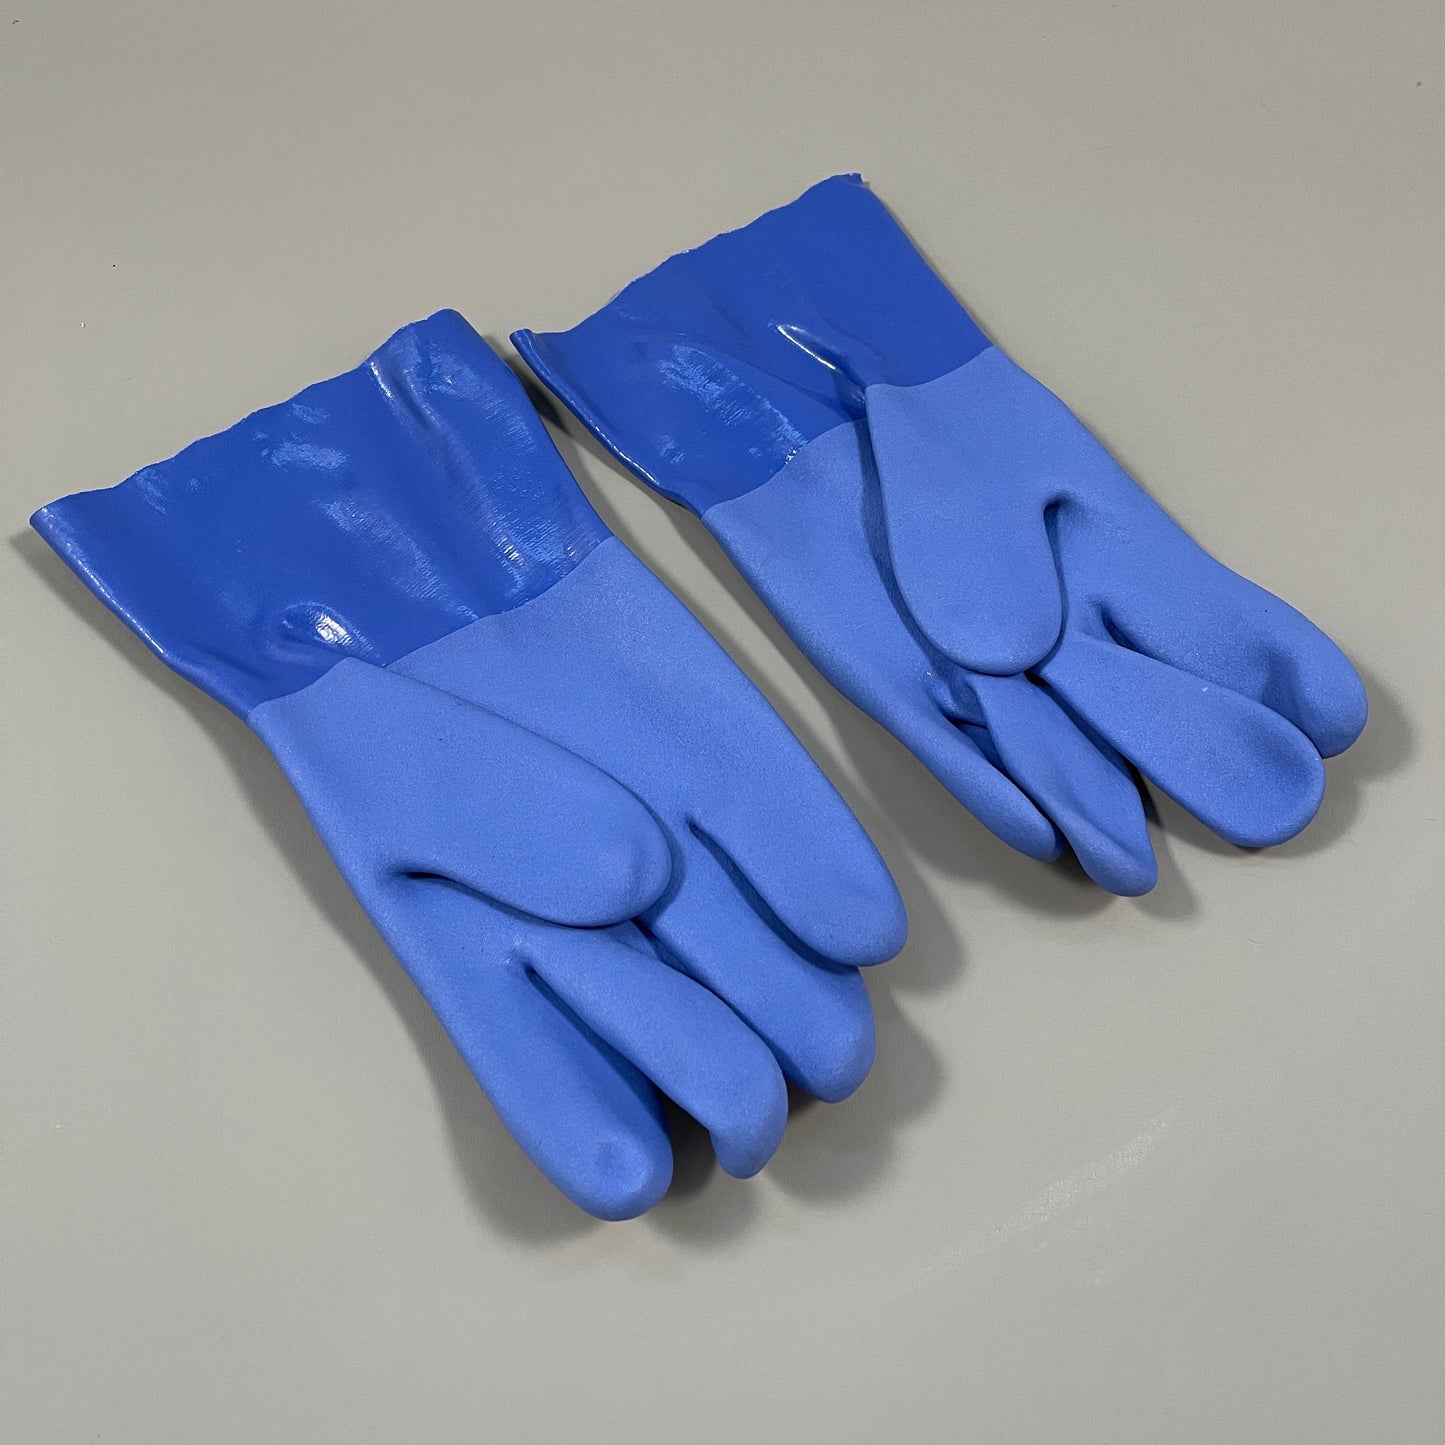 MCR SAFETY Blue Coat Work Gloves PVC Coated Triple Dipped Sz 3XL Blue (New)